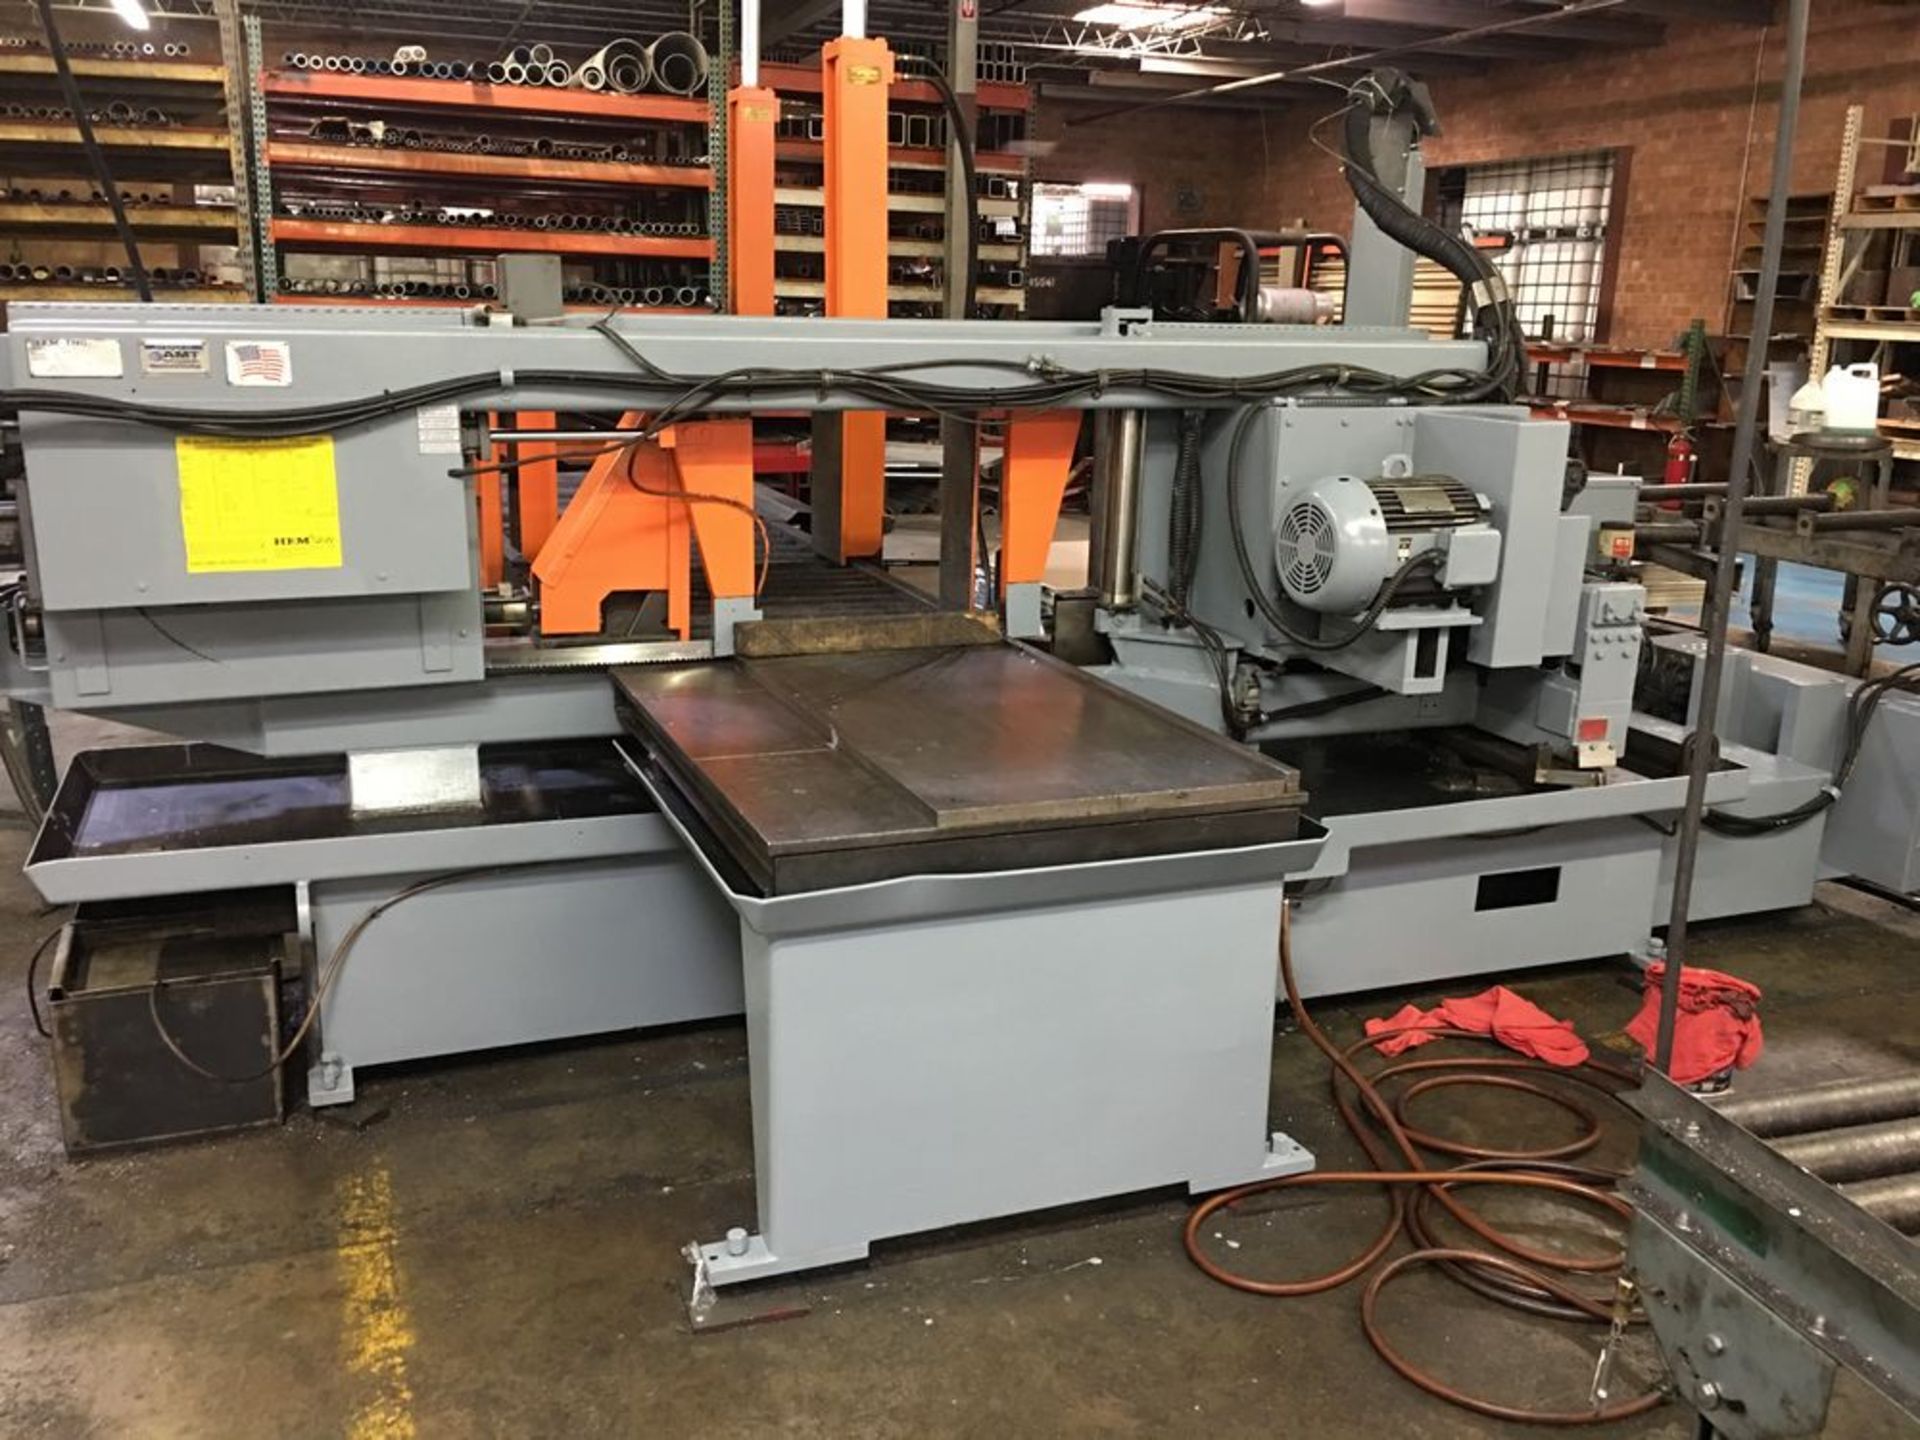 HE&M Fully Automatic Horizontal Band Saw Model FP-130HLA, S/N 821702, NEW 2002